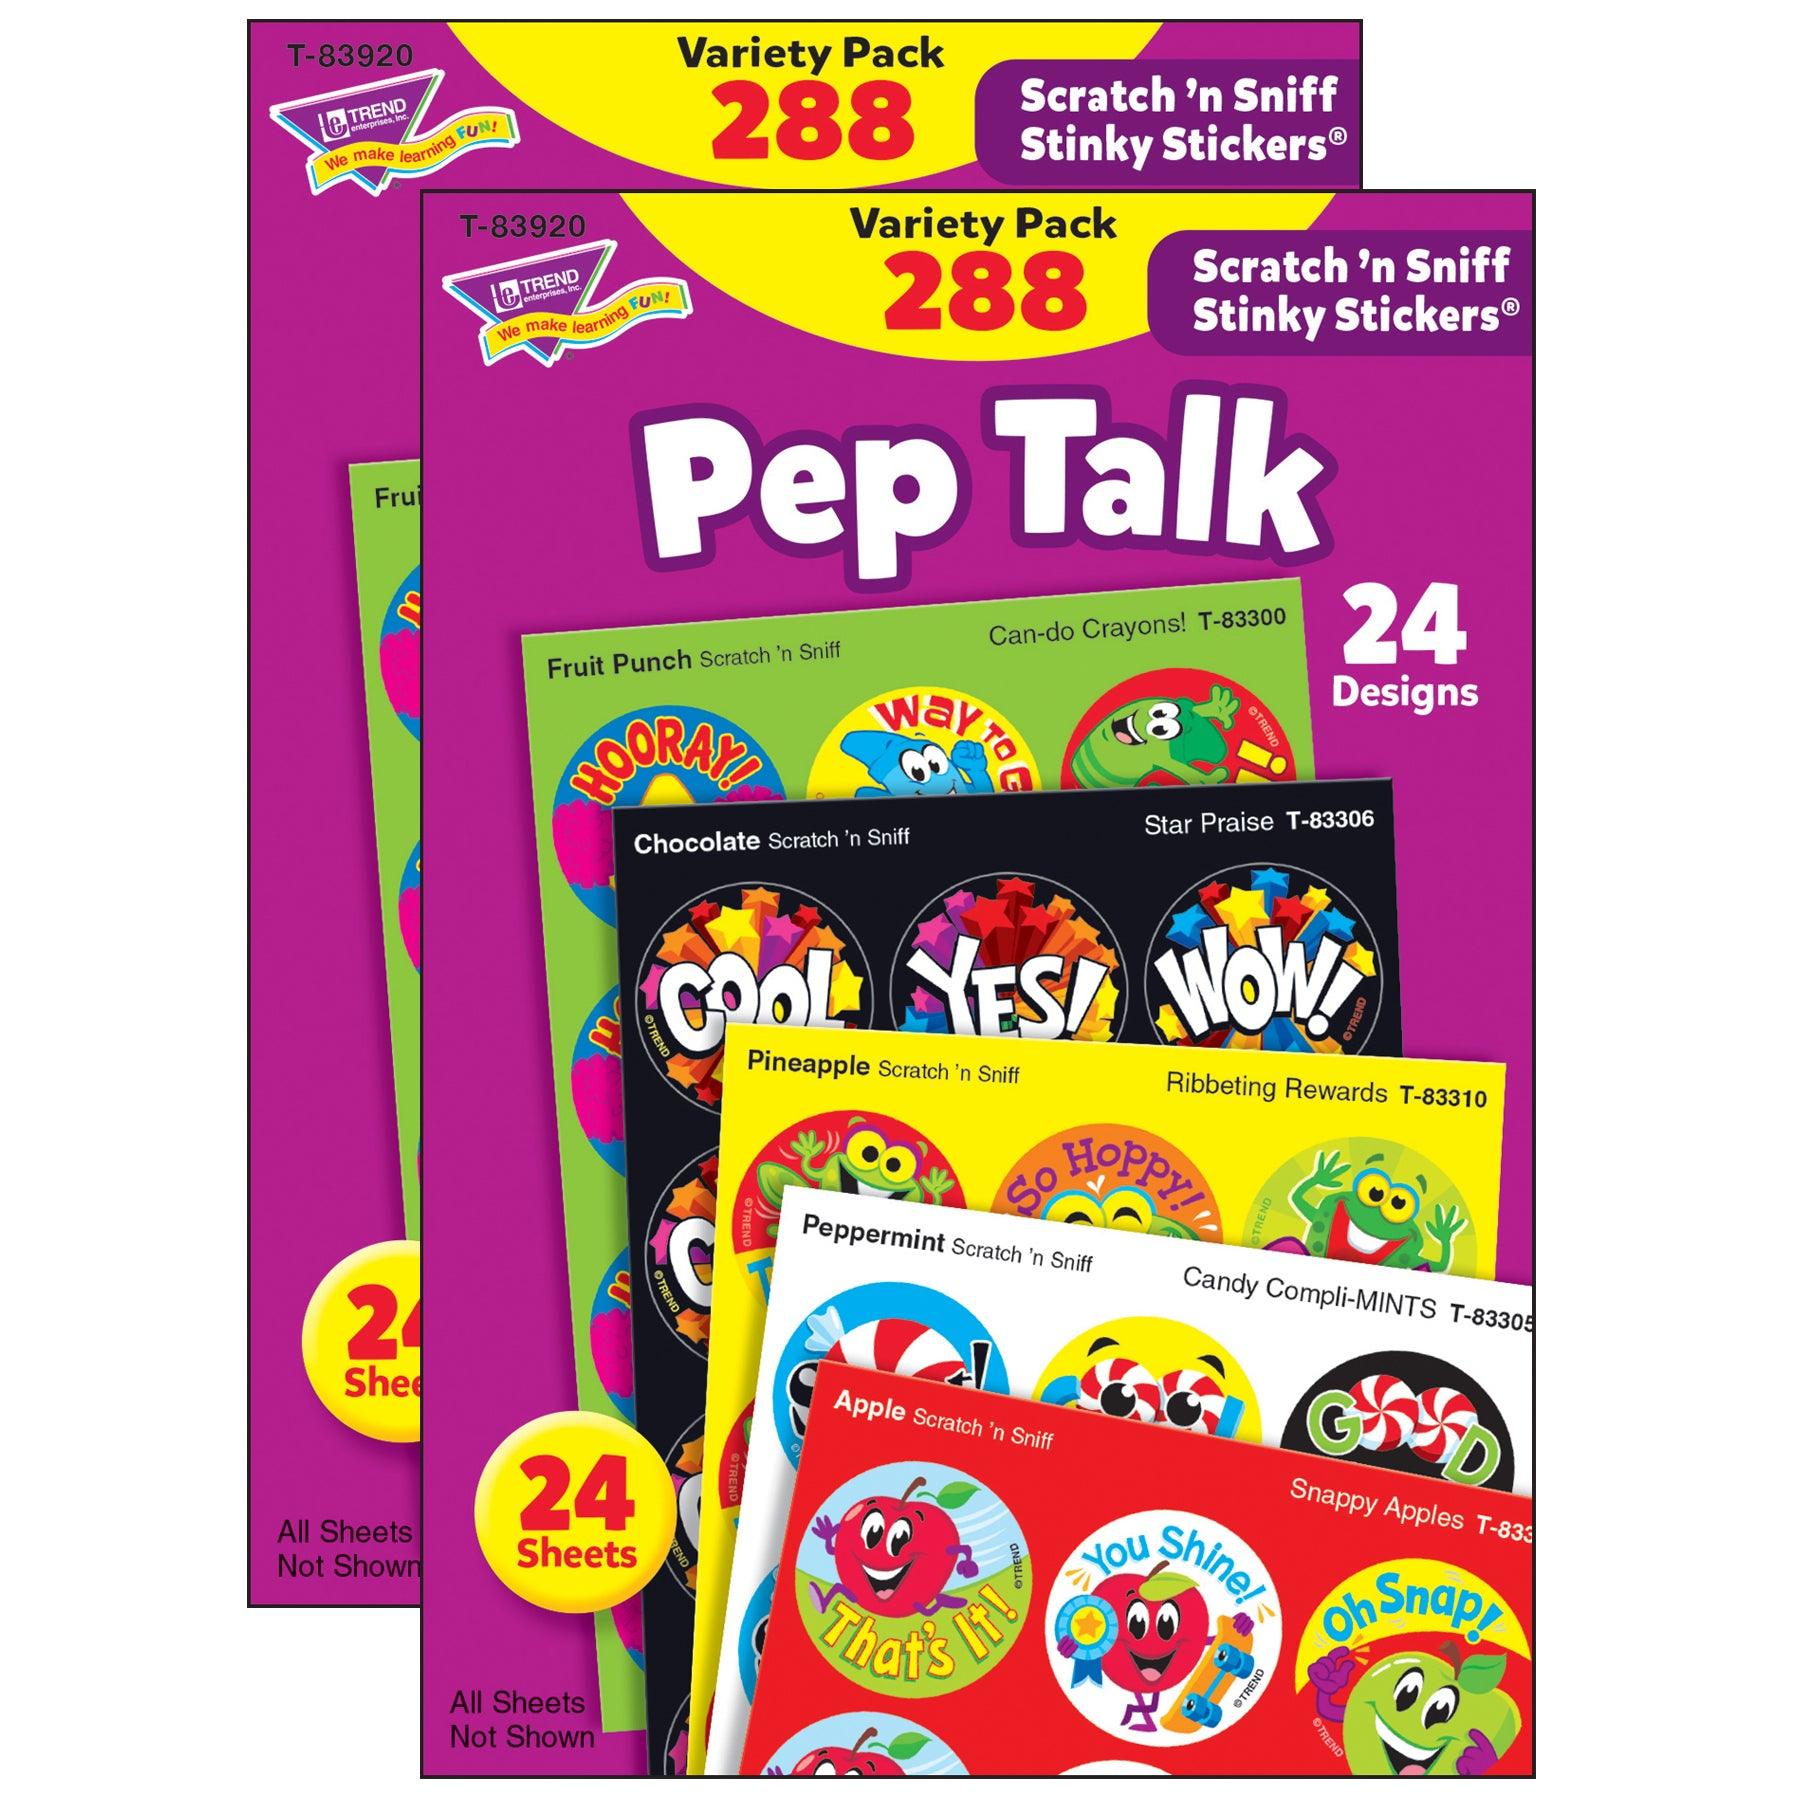 Pep Talk Stinky Stickers® Variety Pack, 288 Count Per Pack, 2 Packs - Loomini